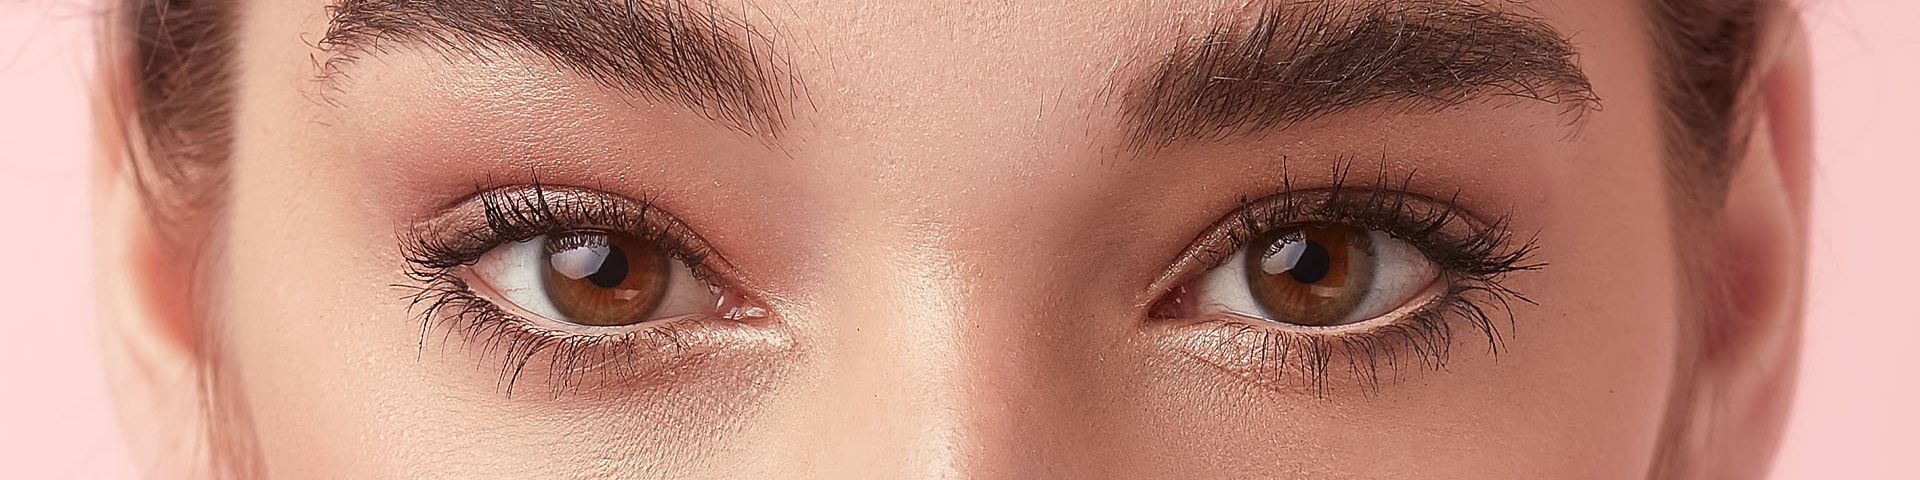 A close-up on a woman's eyes. They are brown and her make up is subtle shades of gold. She has fashionably natural eyebrows.